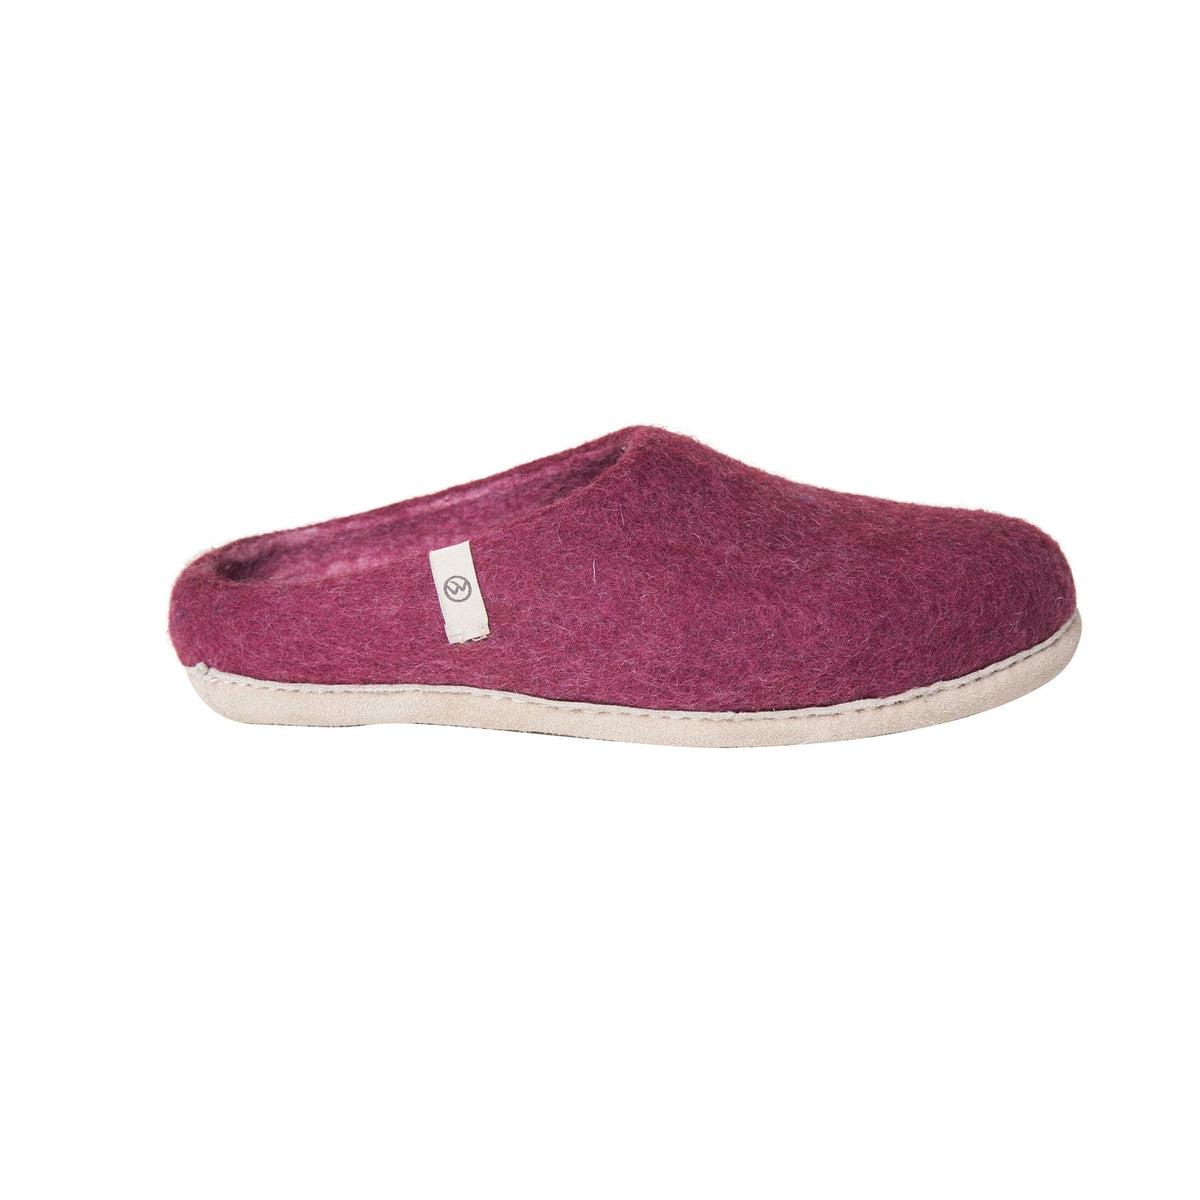 Adult Wool Slippers - Cranberry